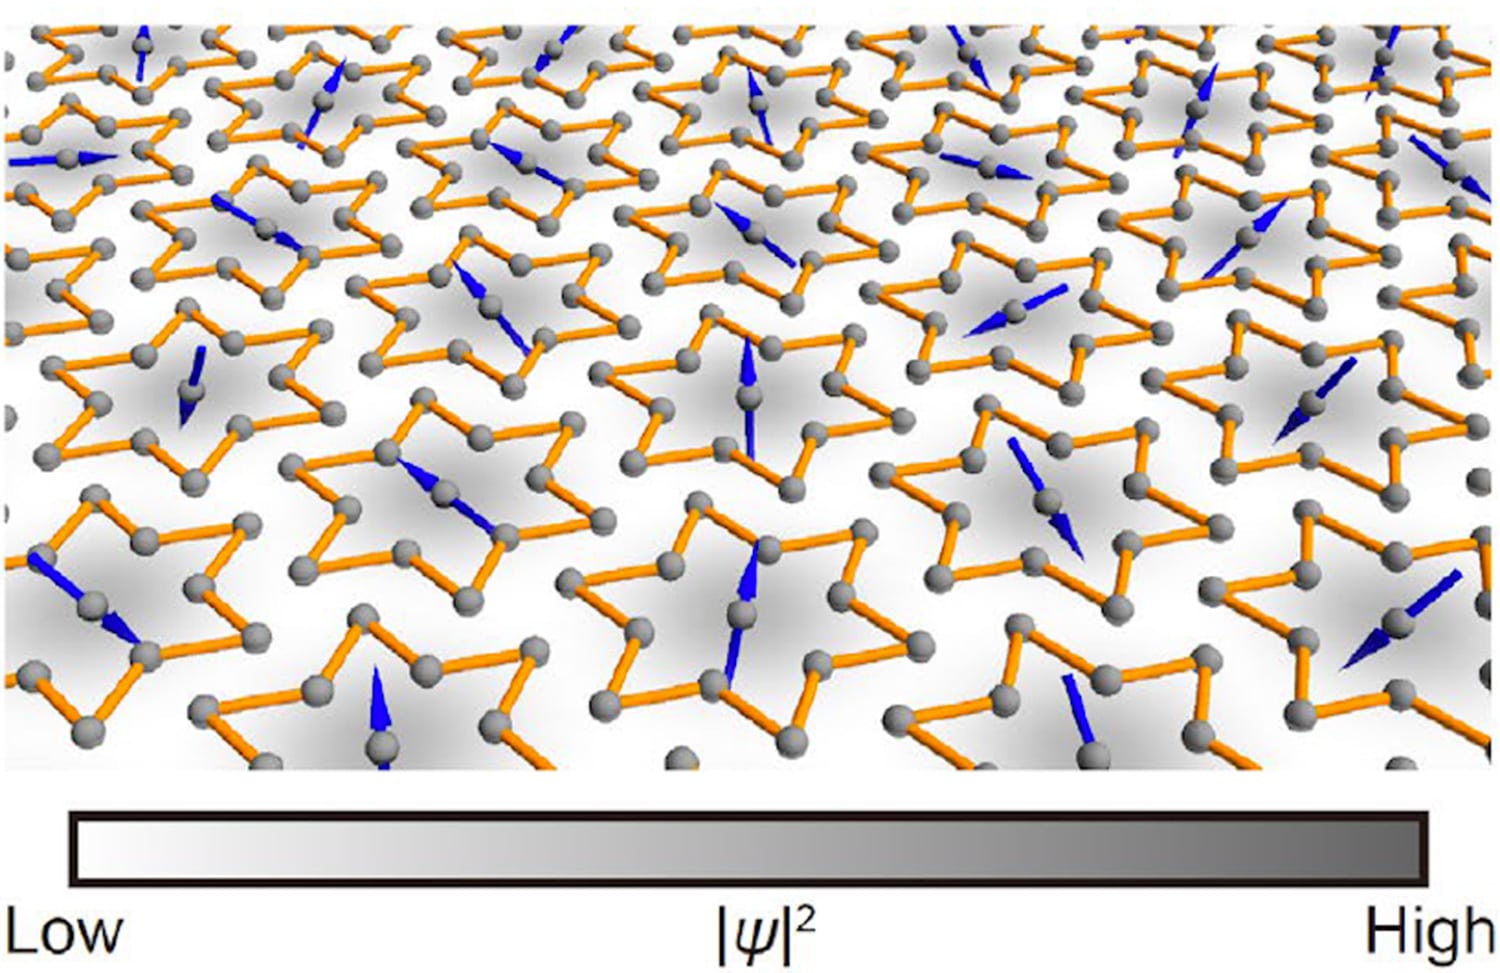 density wave pattern in a monolayer of tantalum diselenide. Each star consists of 13 tantalum atoms